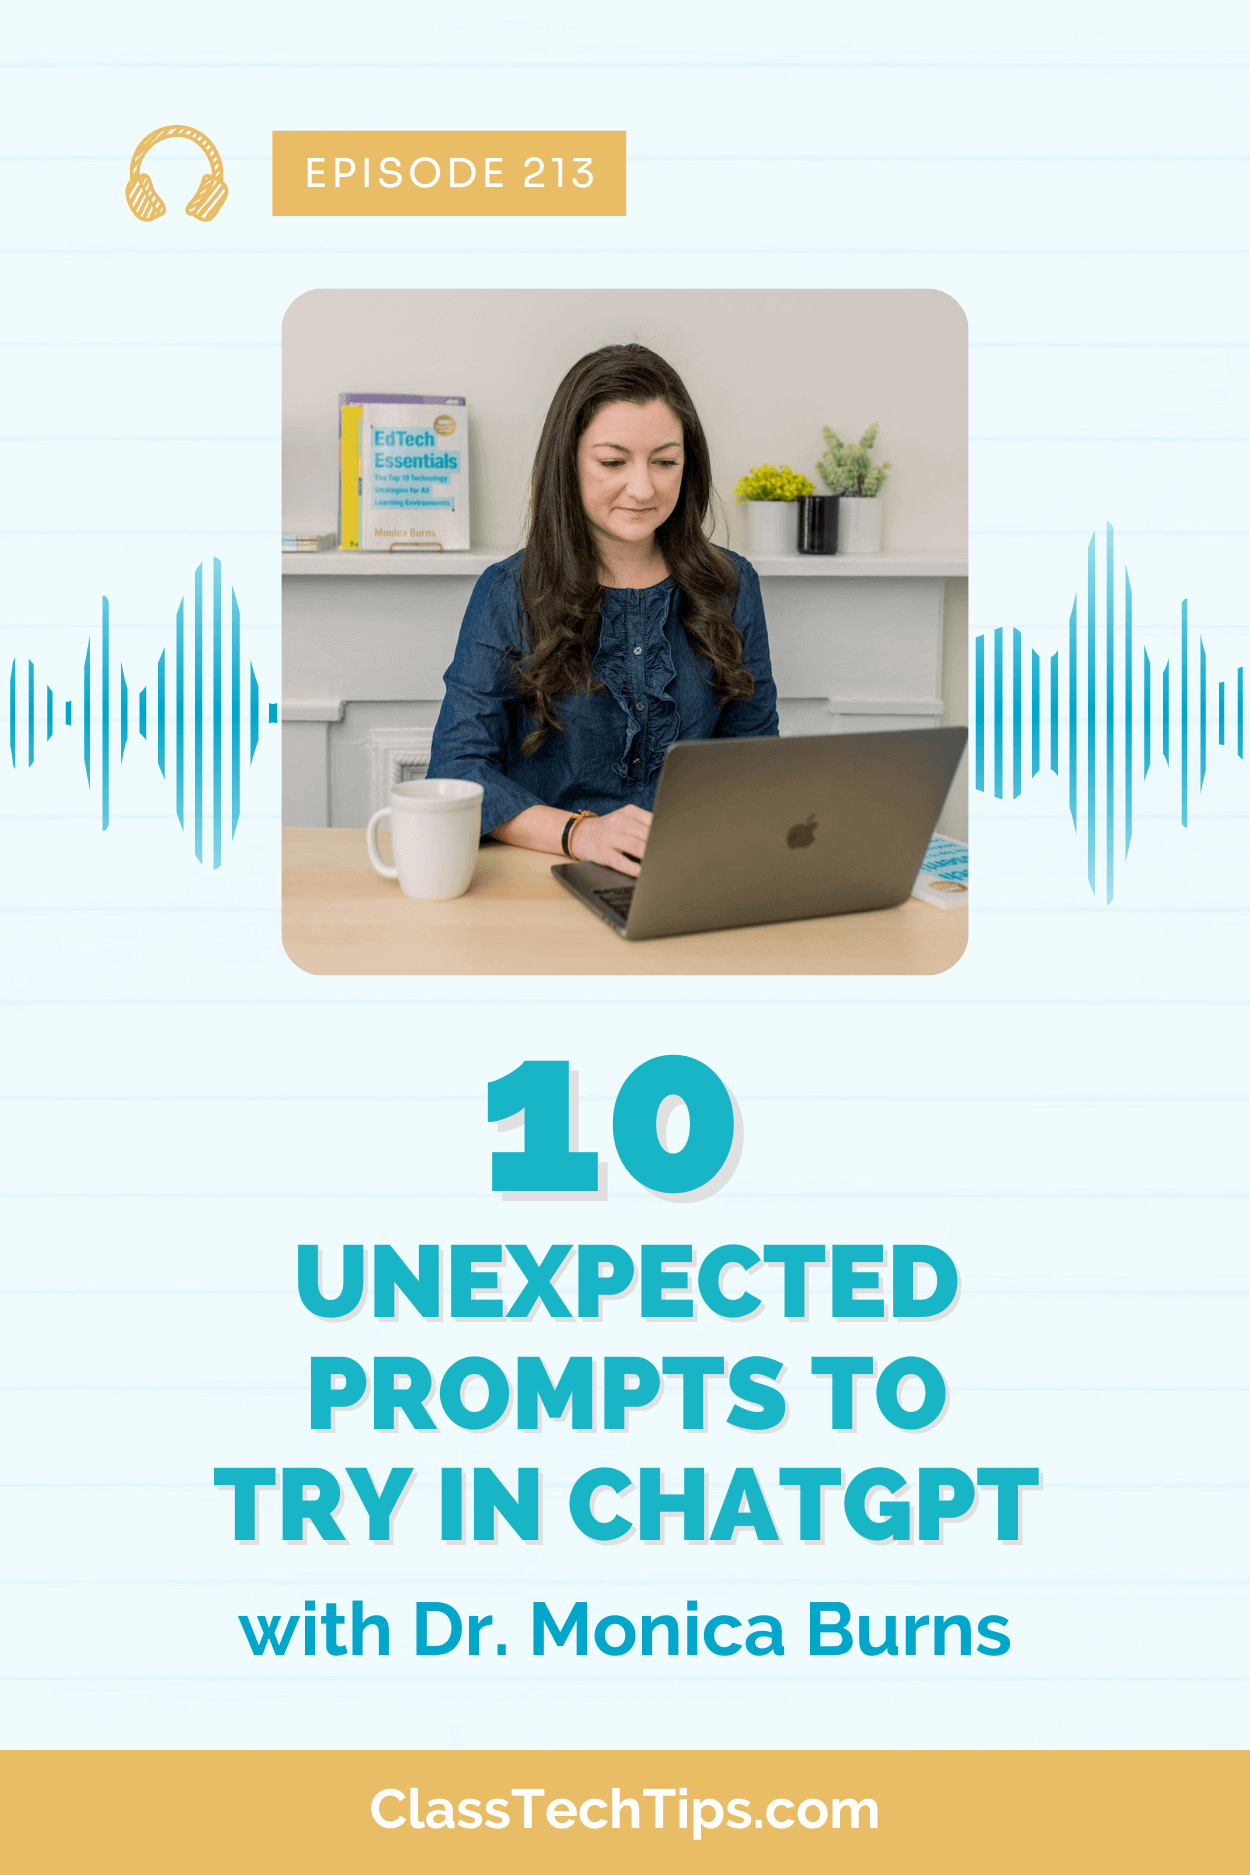 Monica Burns, host of the Easy EdTech Podcast, sits at her desk with a computer, ready to discuss creative prompts to try with ChatGPT for engaging classroom activities.